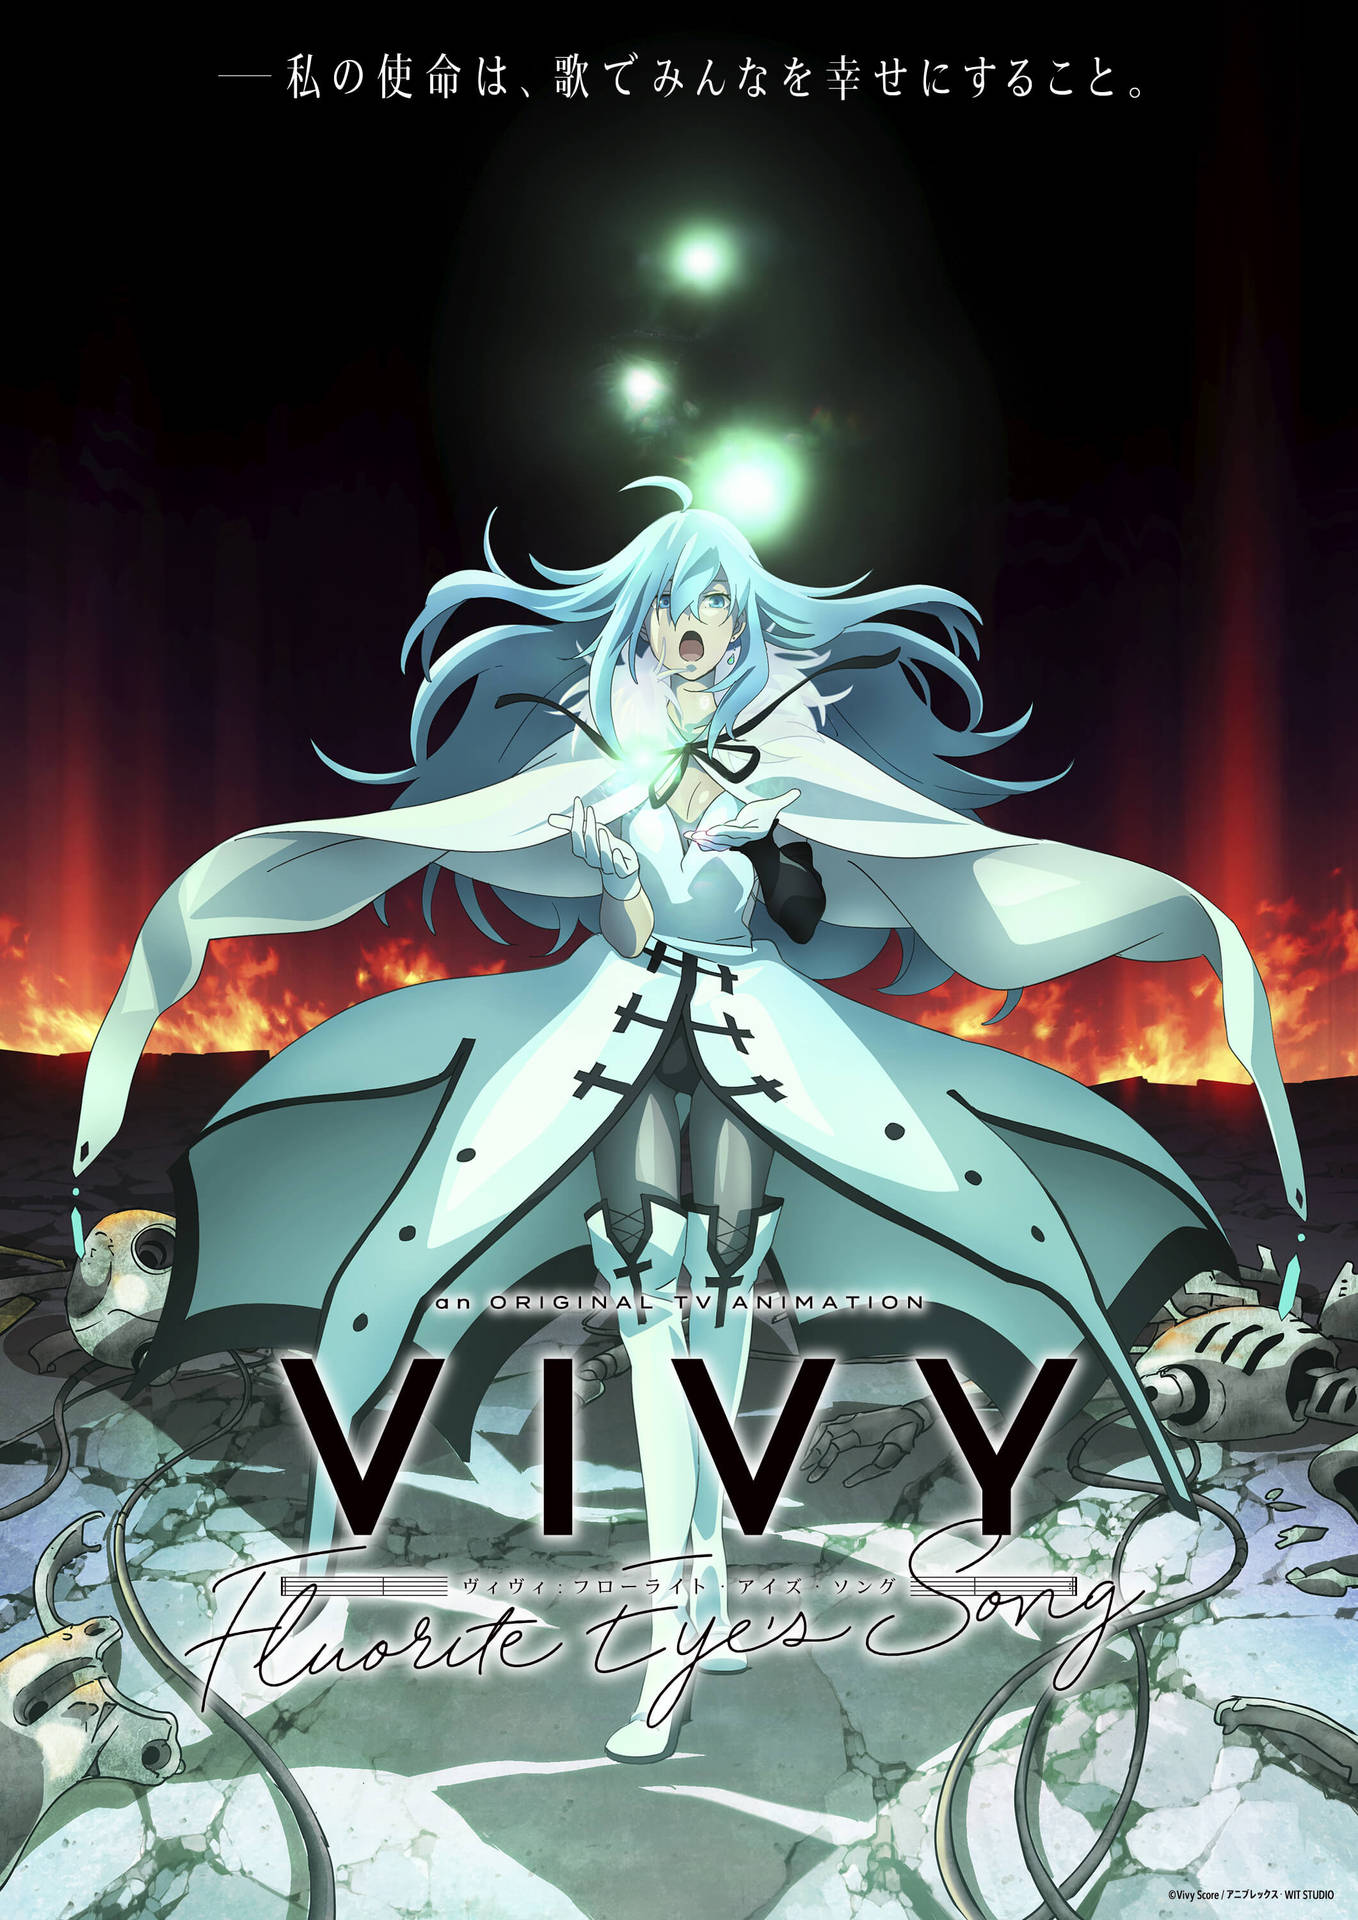 Have a great time with Vivy, a virtual idol and artificial intelligence! Wallpaper